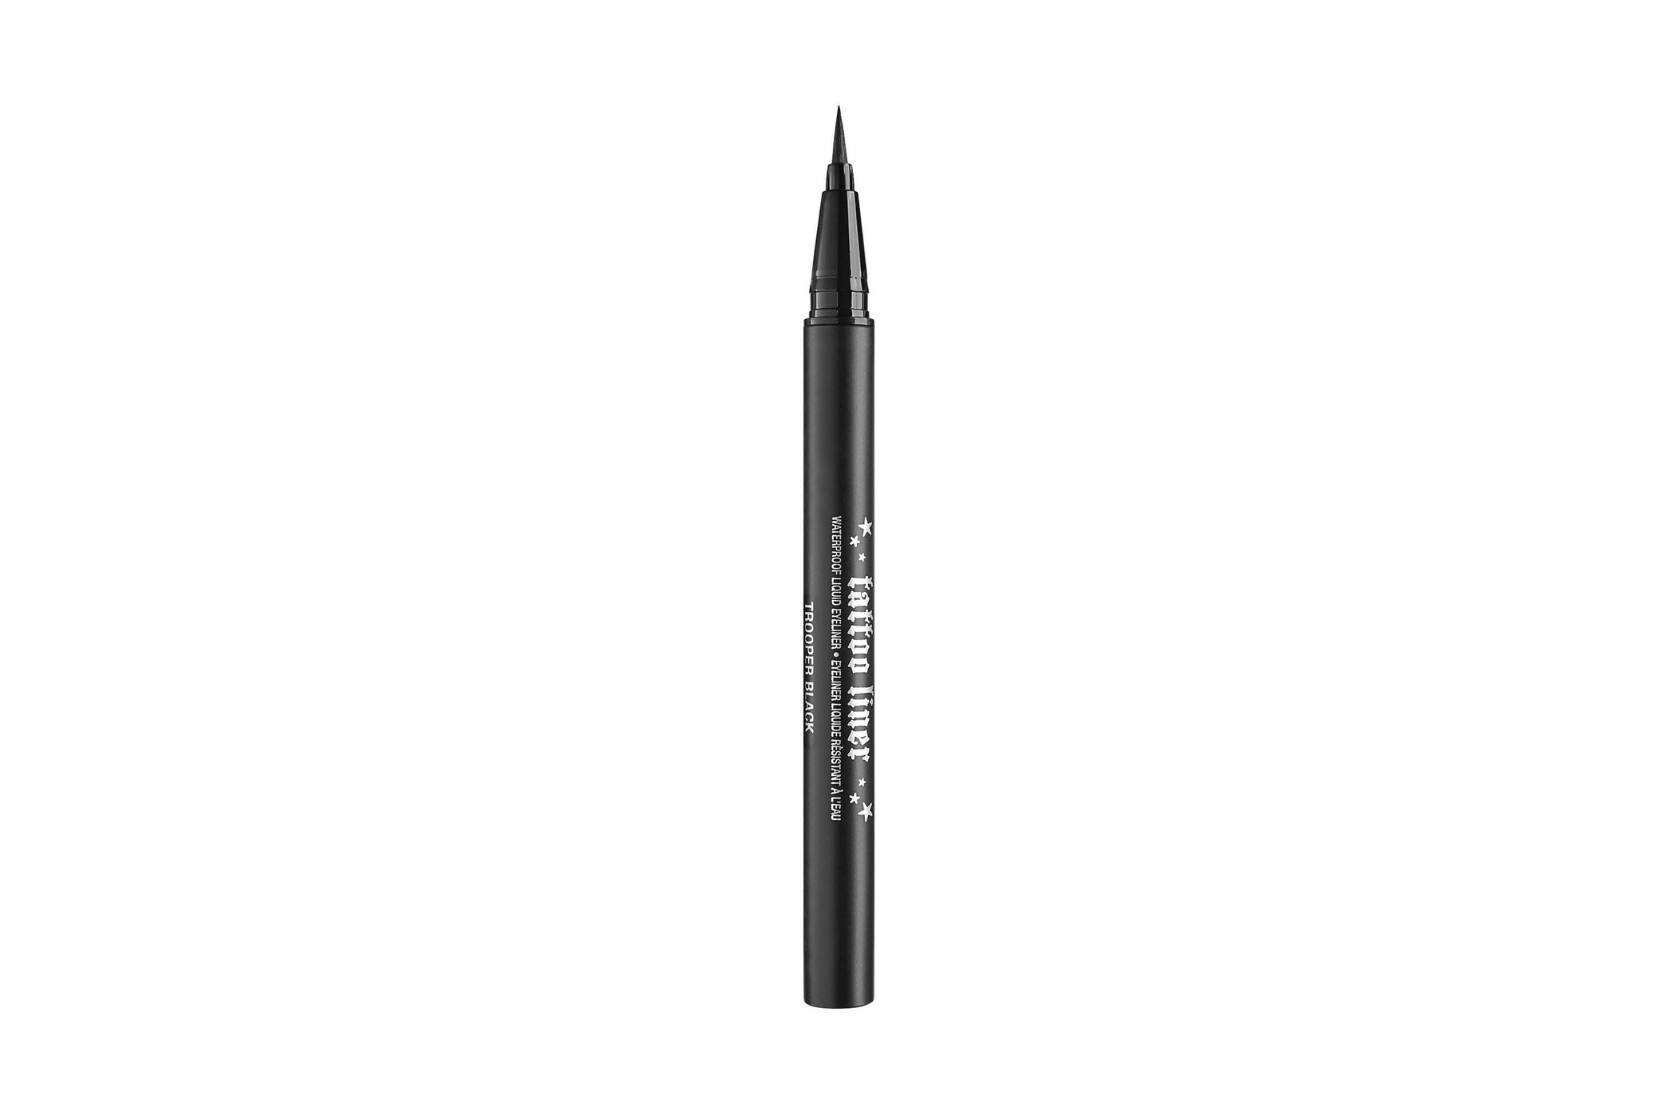 Anyone know a good alternative for chanel kohl eye pencil in ambre